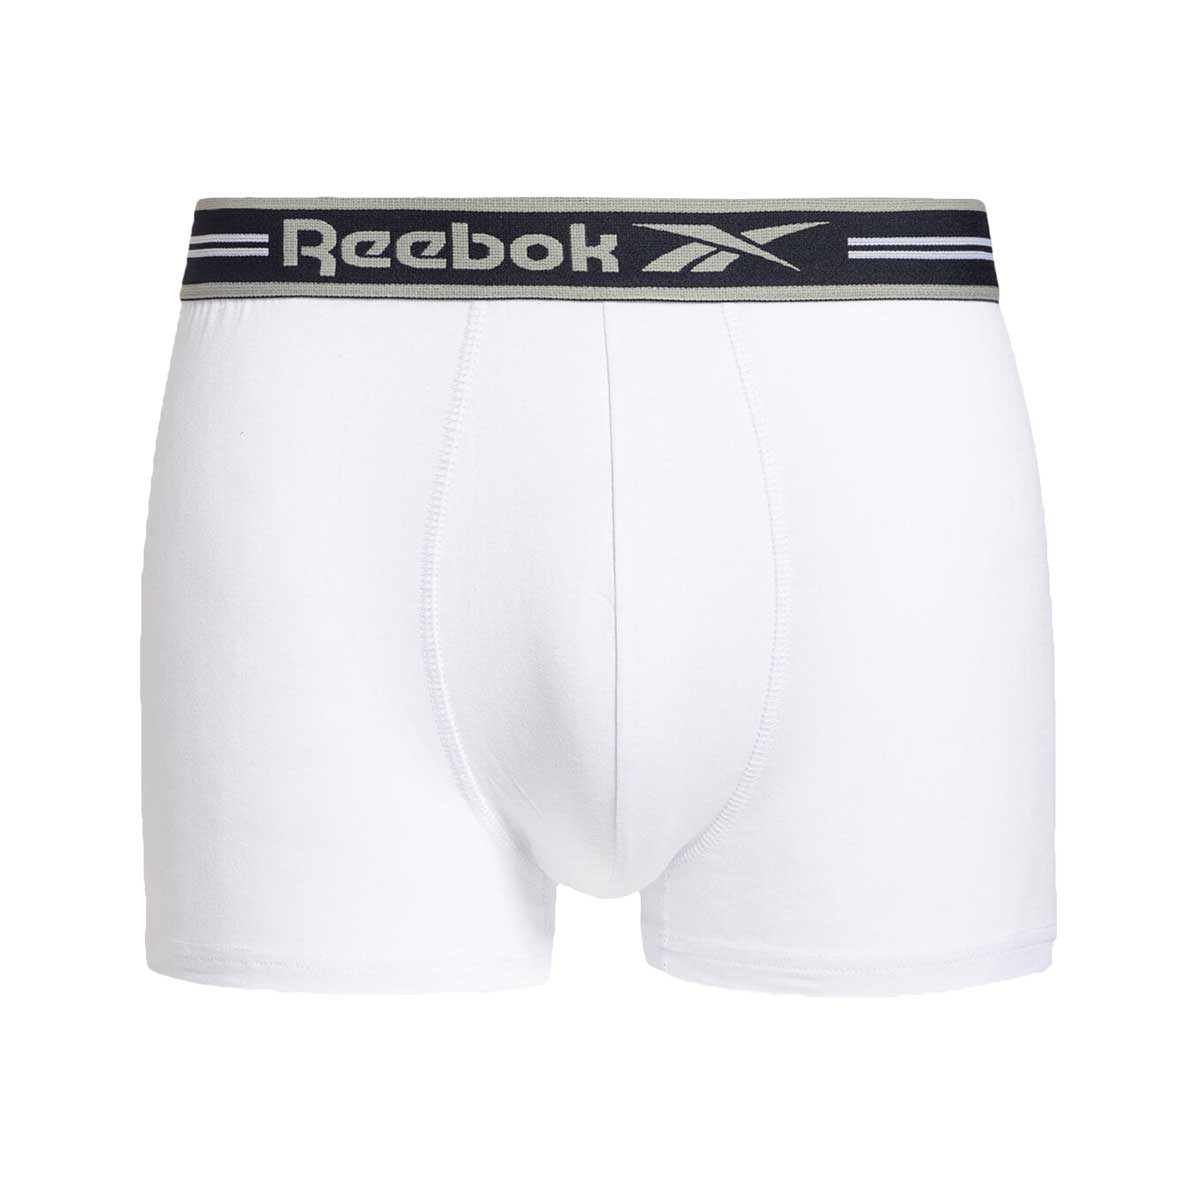 Reebok Mens Boxers 3 Pack Gino Sports Trunk 